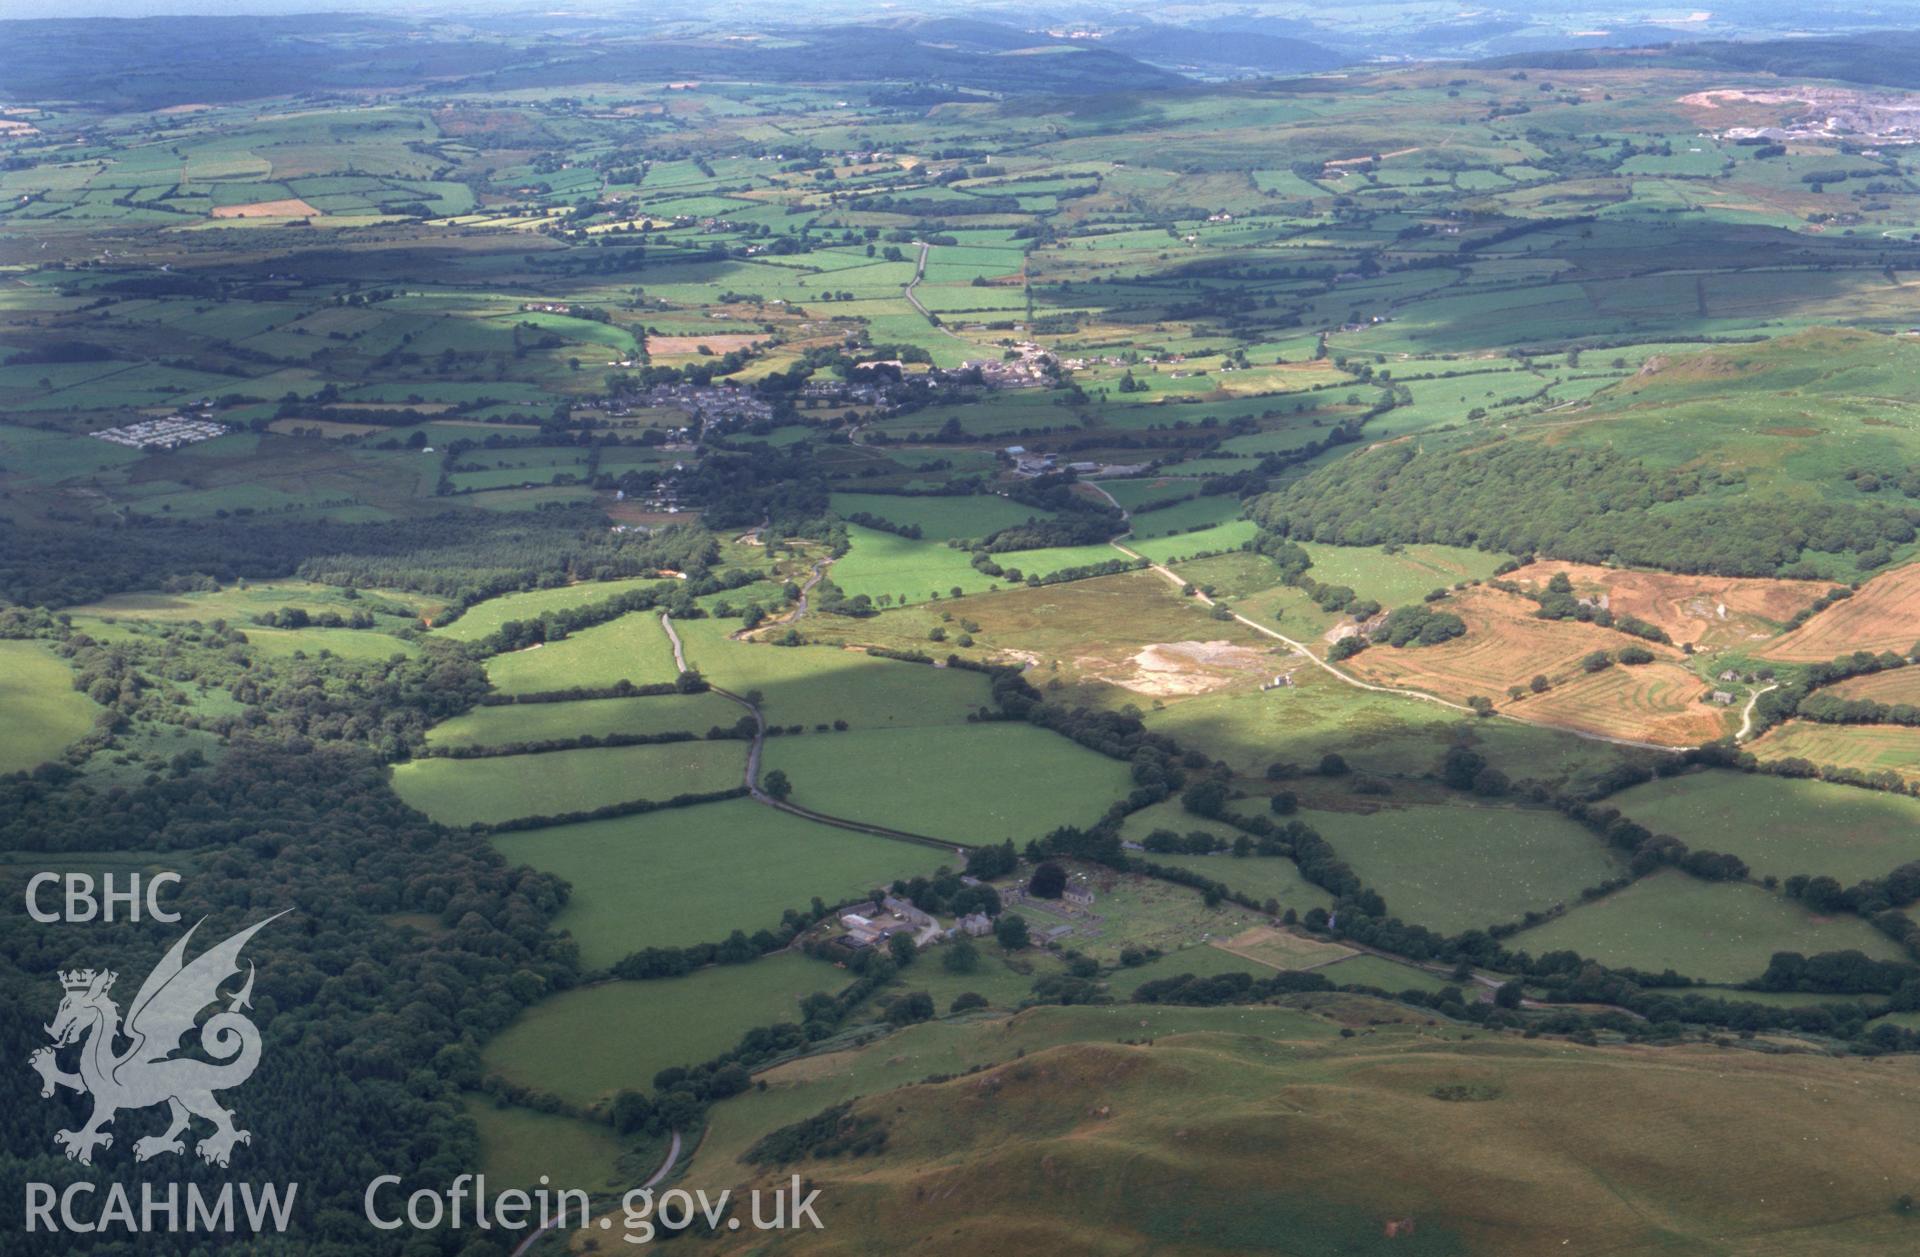 RCAHMW colour oblique aerial photograph of Strata Florida Abbey, long landscape view from east. Taken by Toby Driver on 05/08/2002